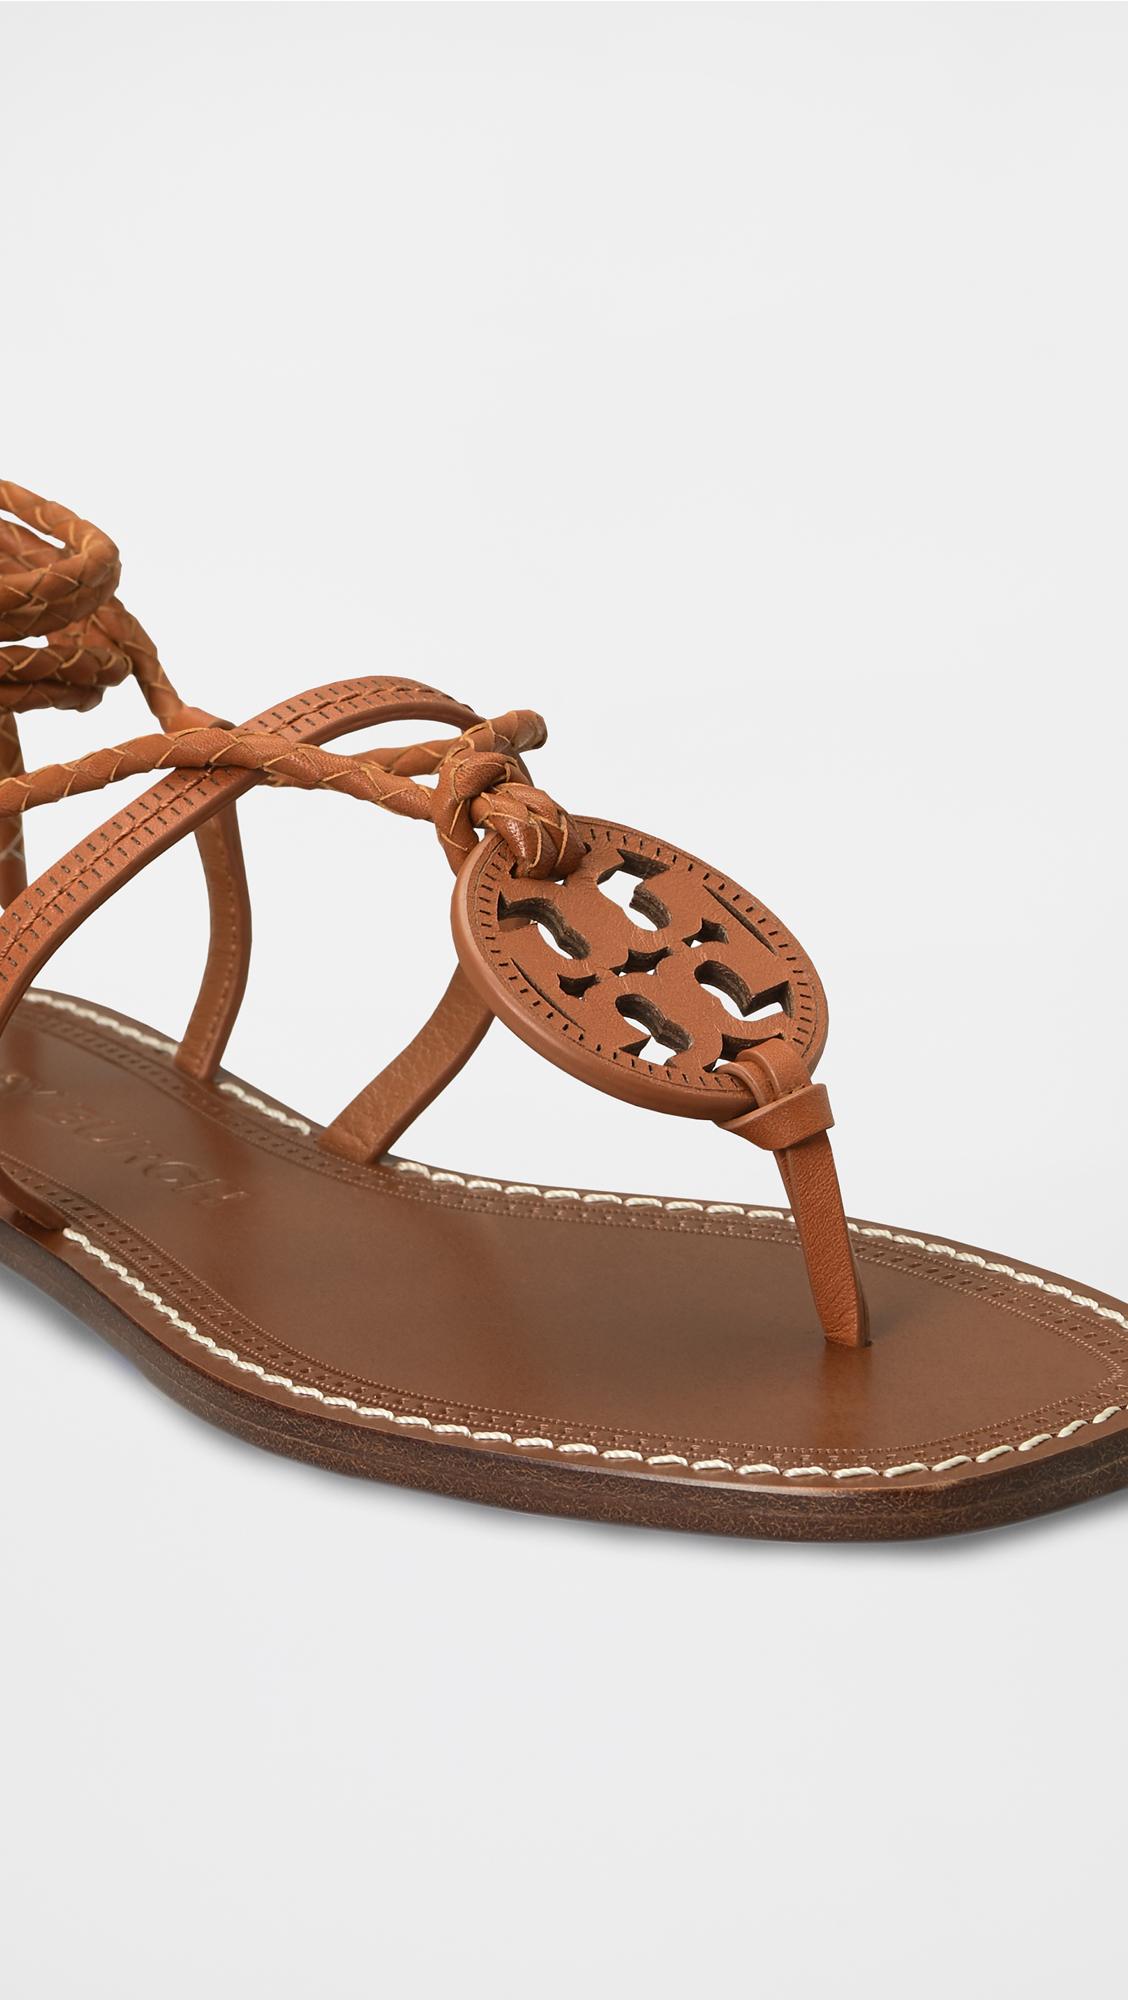 Tory Burch Miller Braided Ankle-wrap Sandals in Brown | Lyst